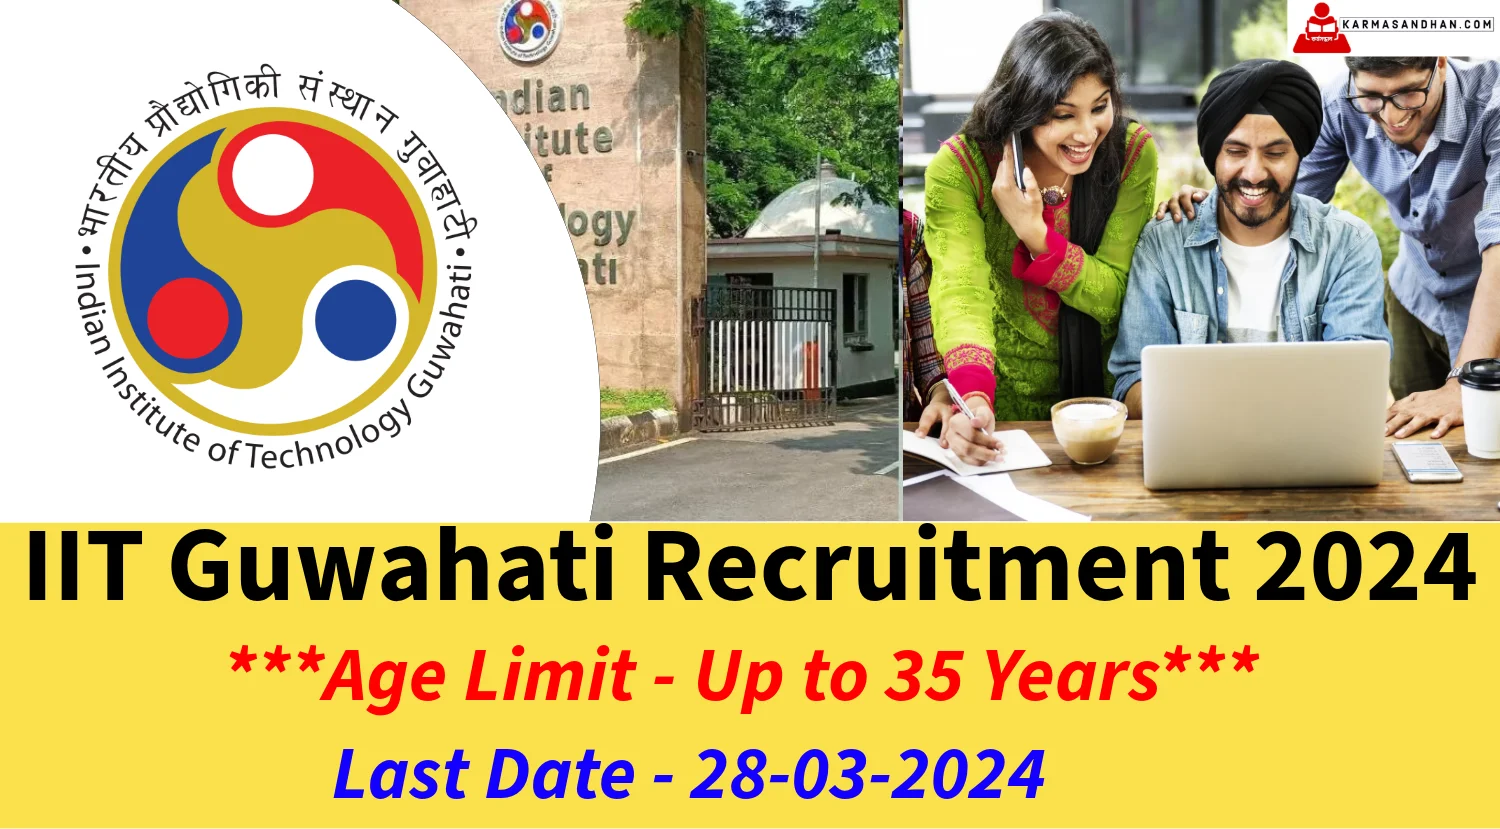 IIT Guwahati Recruitment 2024 Notification for Various Faculty Posts